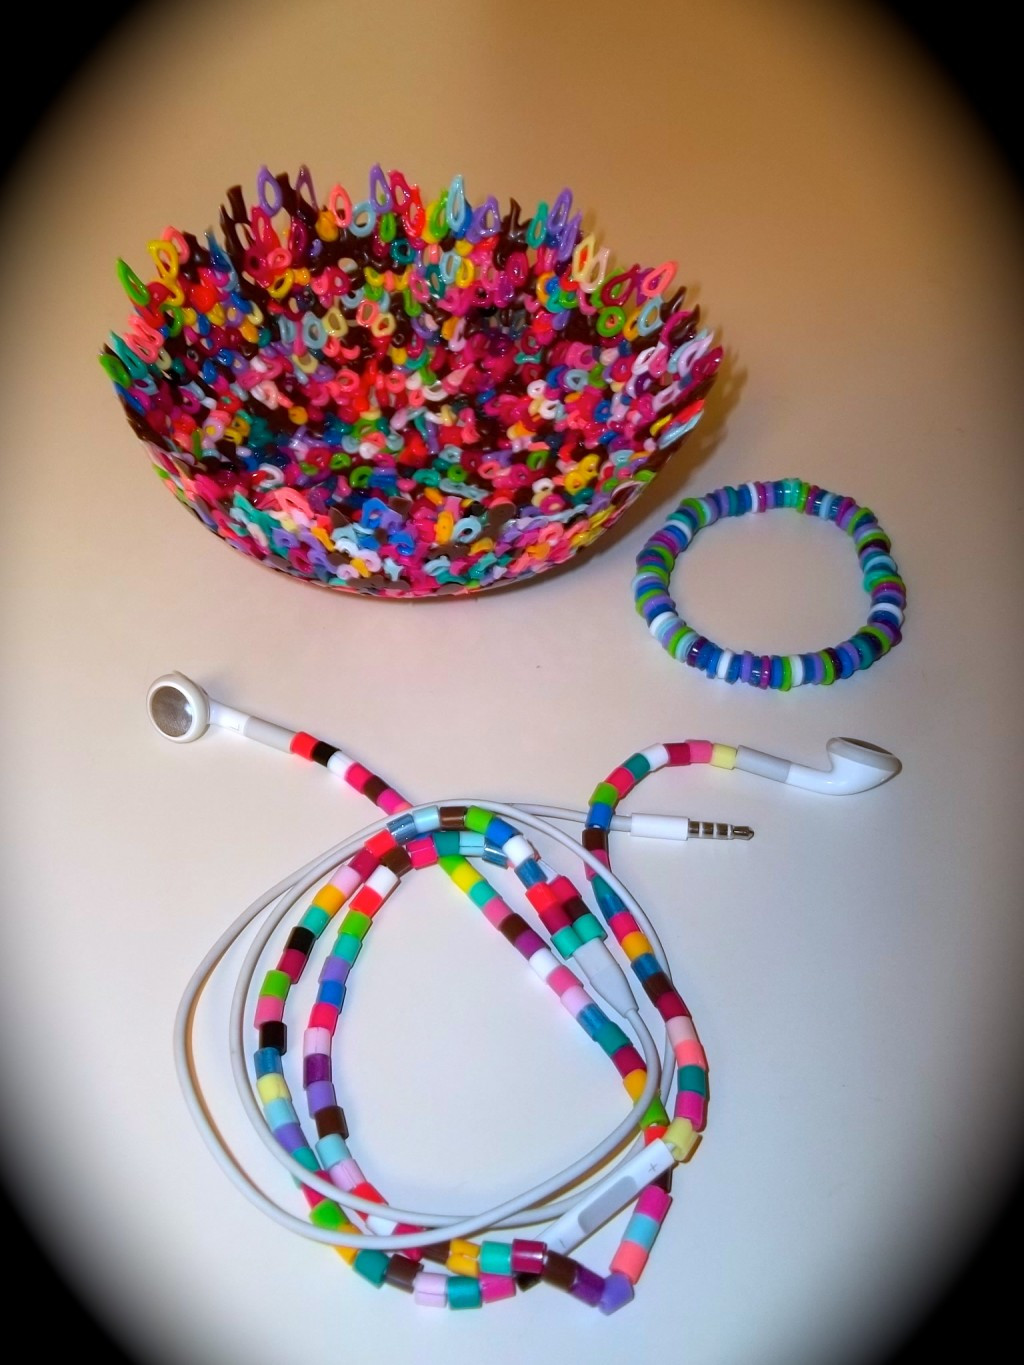 Fun Craft Projects For Adults
 Perler Bead Crafts 3 Fun and Fabulous Projects